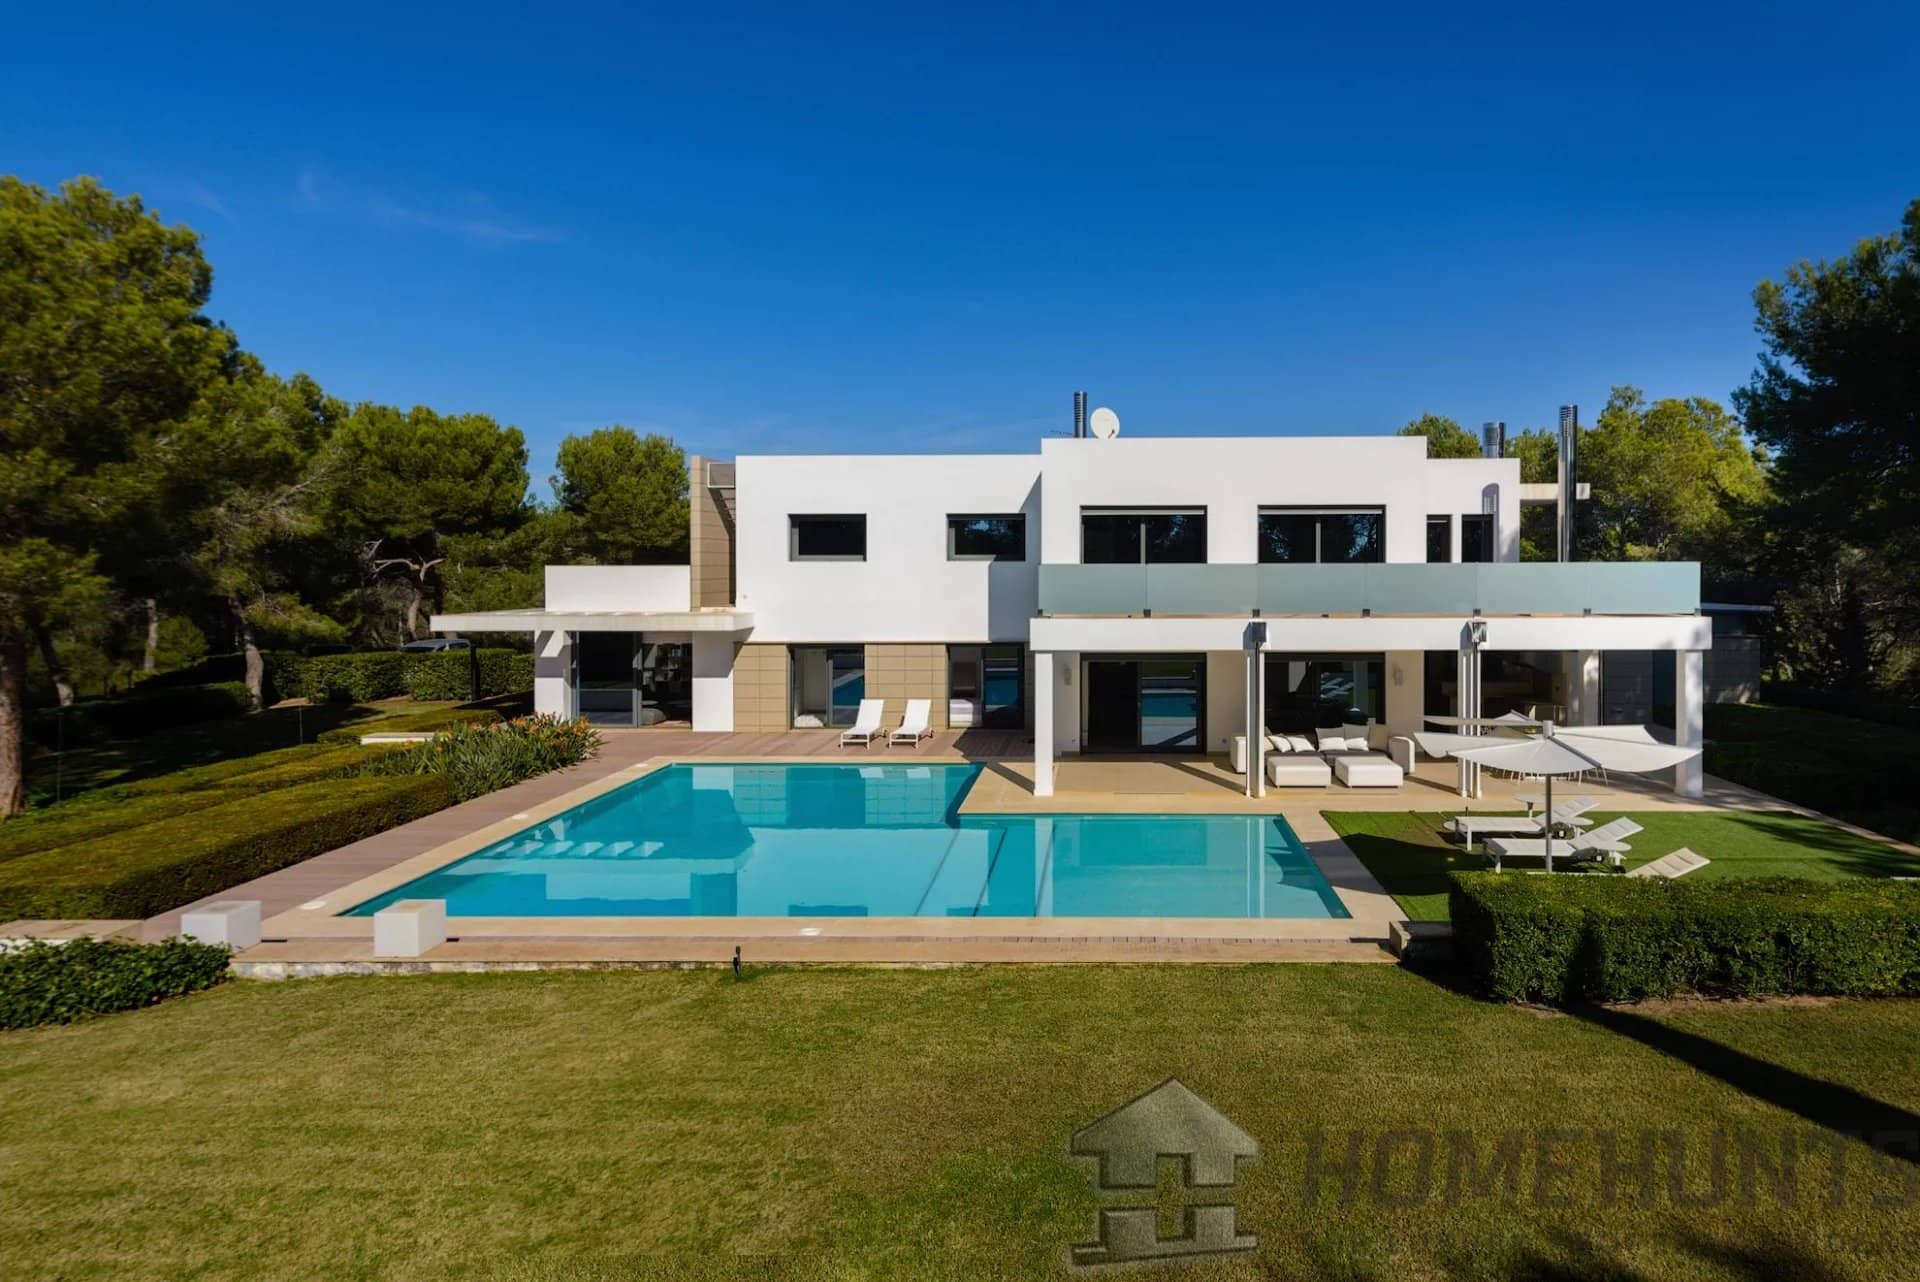 Villa/House For Sale in Es Cana 3